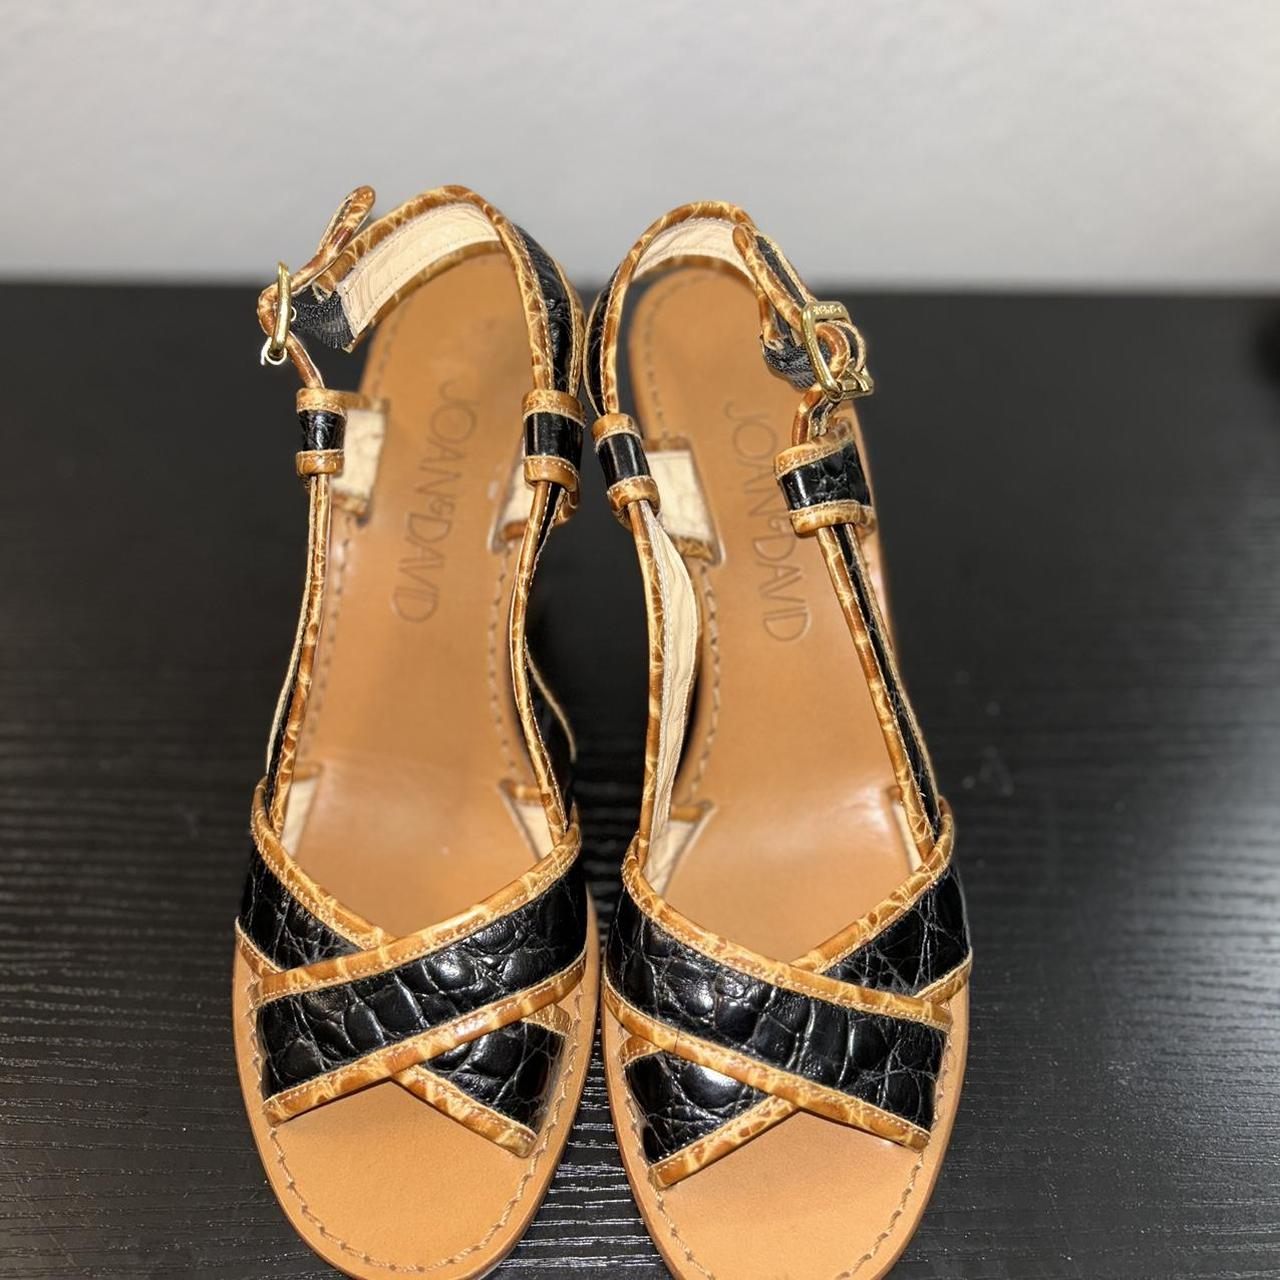 Joan leather sandals